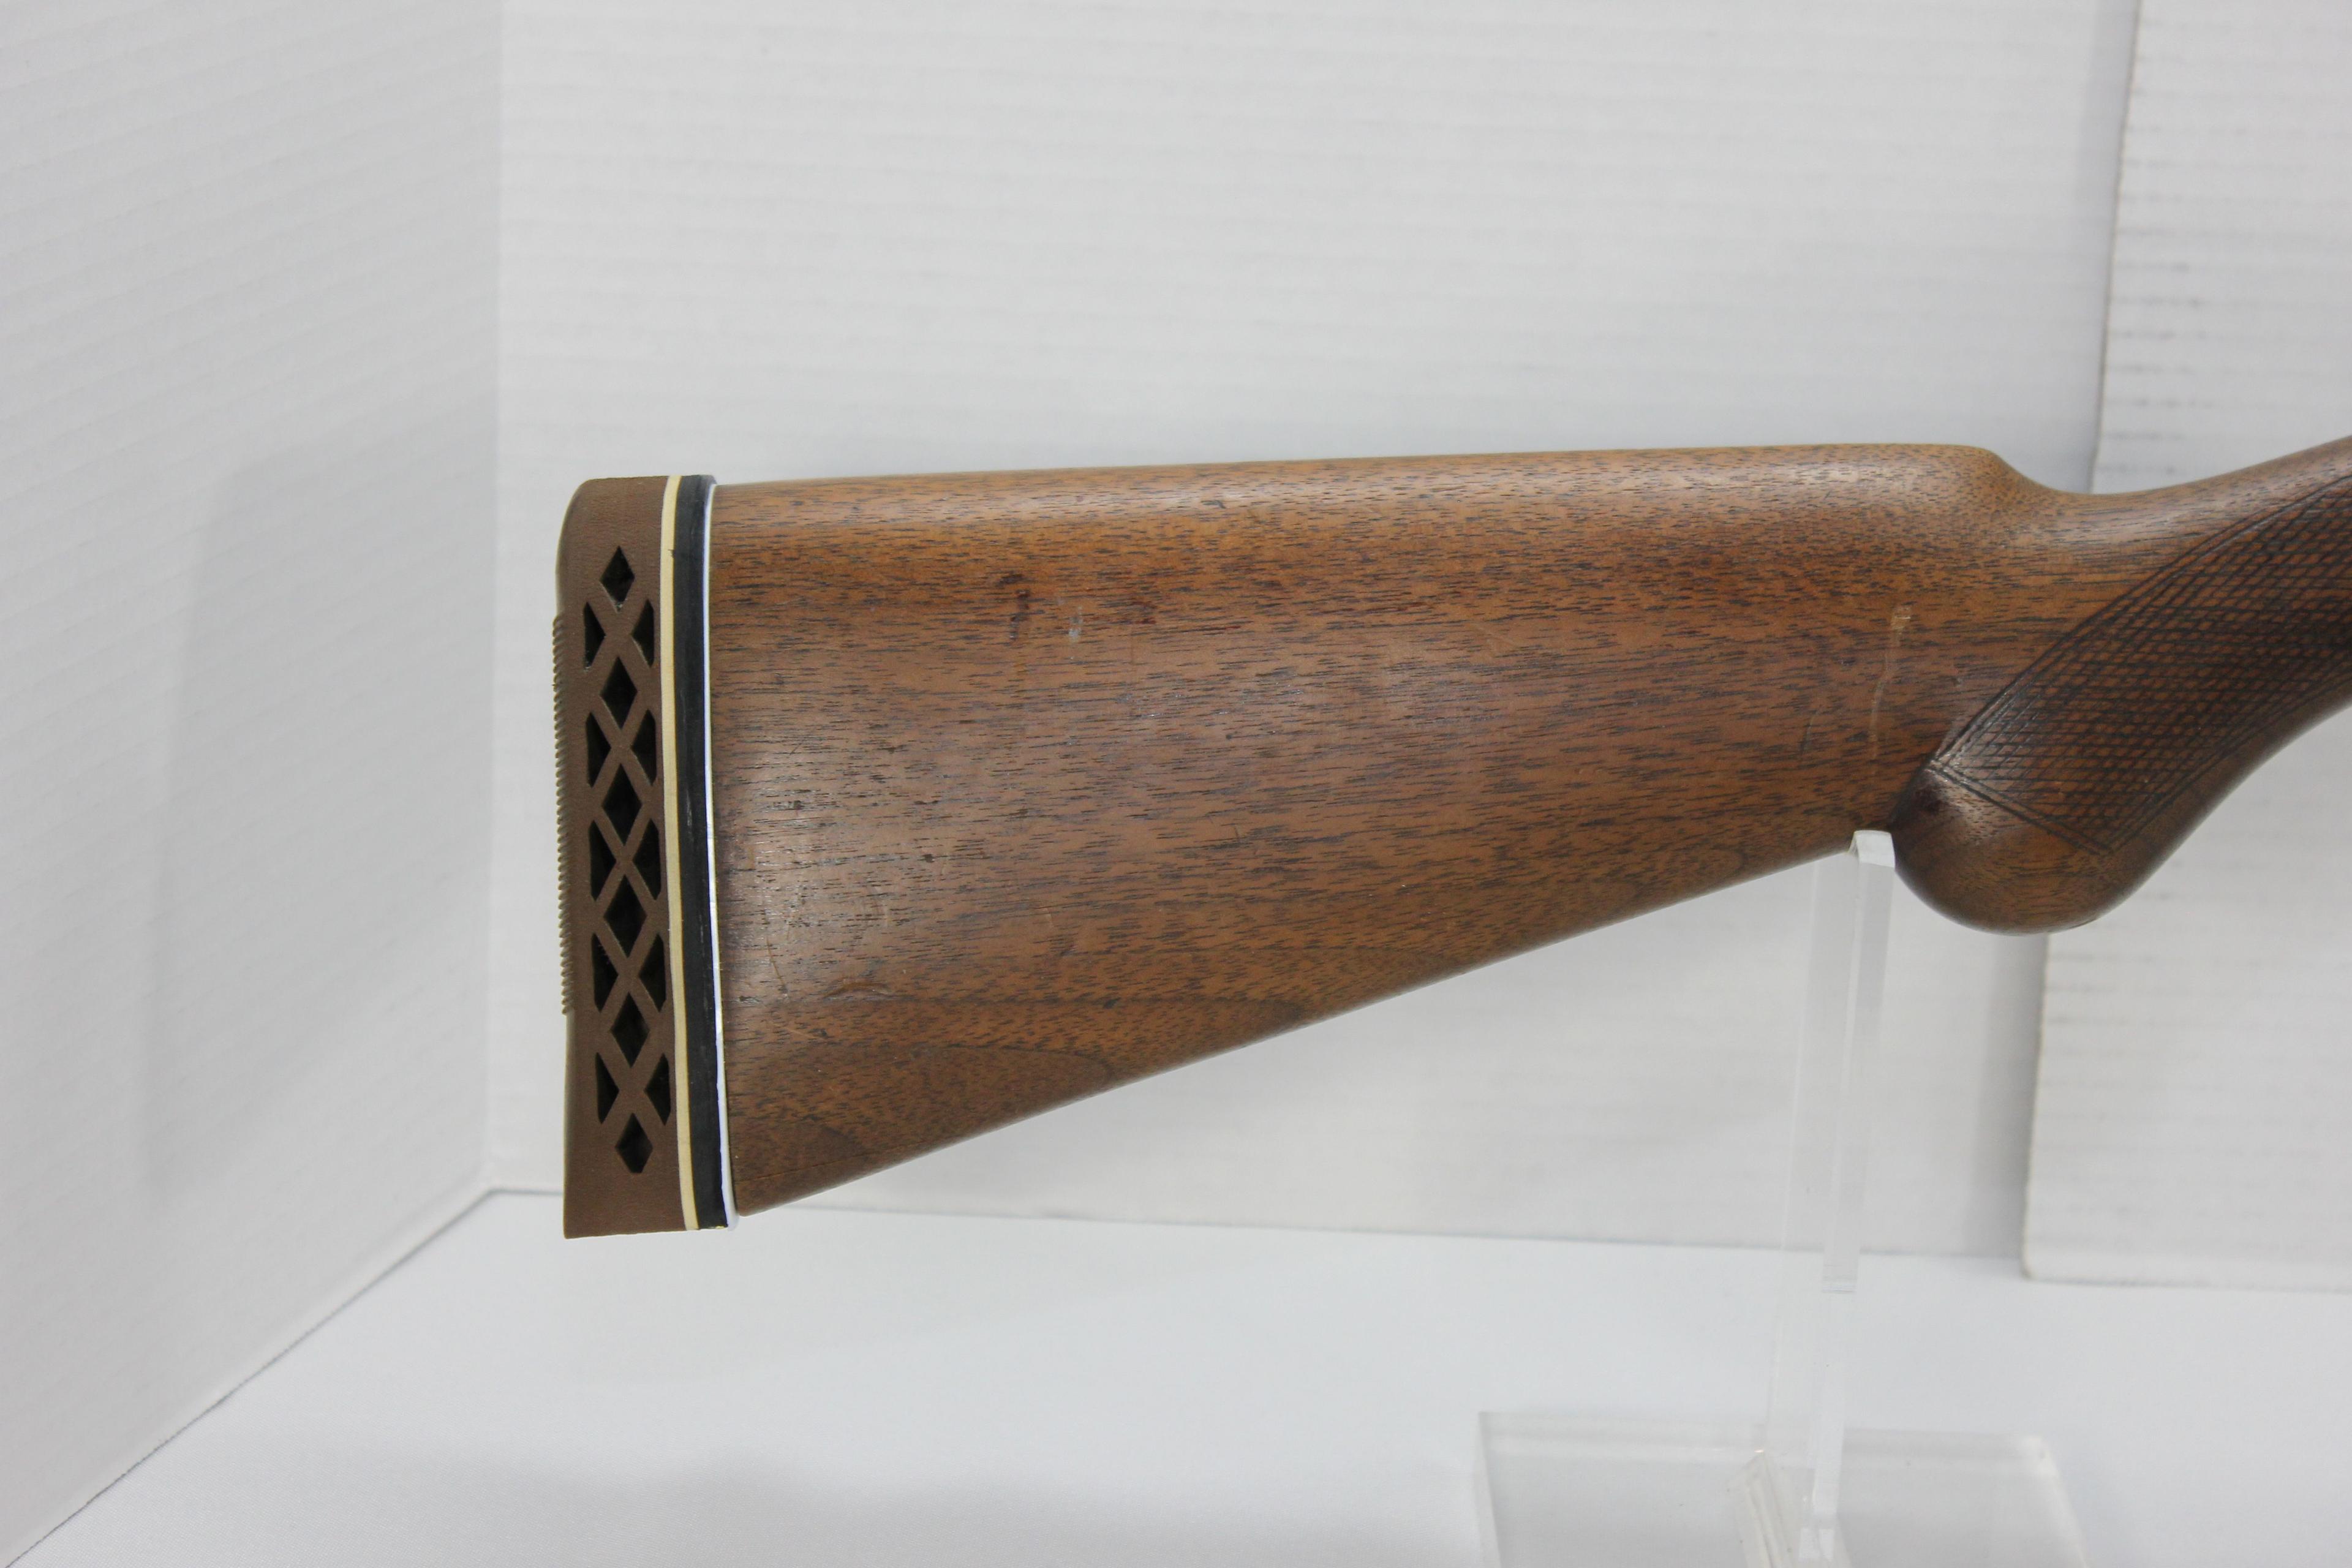 Stevens Model 335 Double SXS 12 Ga. 2-3/4" Cham. Side-By-Side Double BBL Shotgun w/30" BBL and Doubl